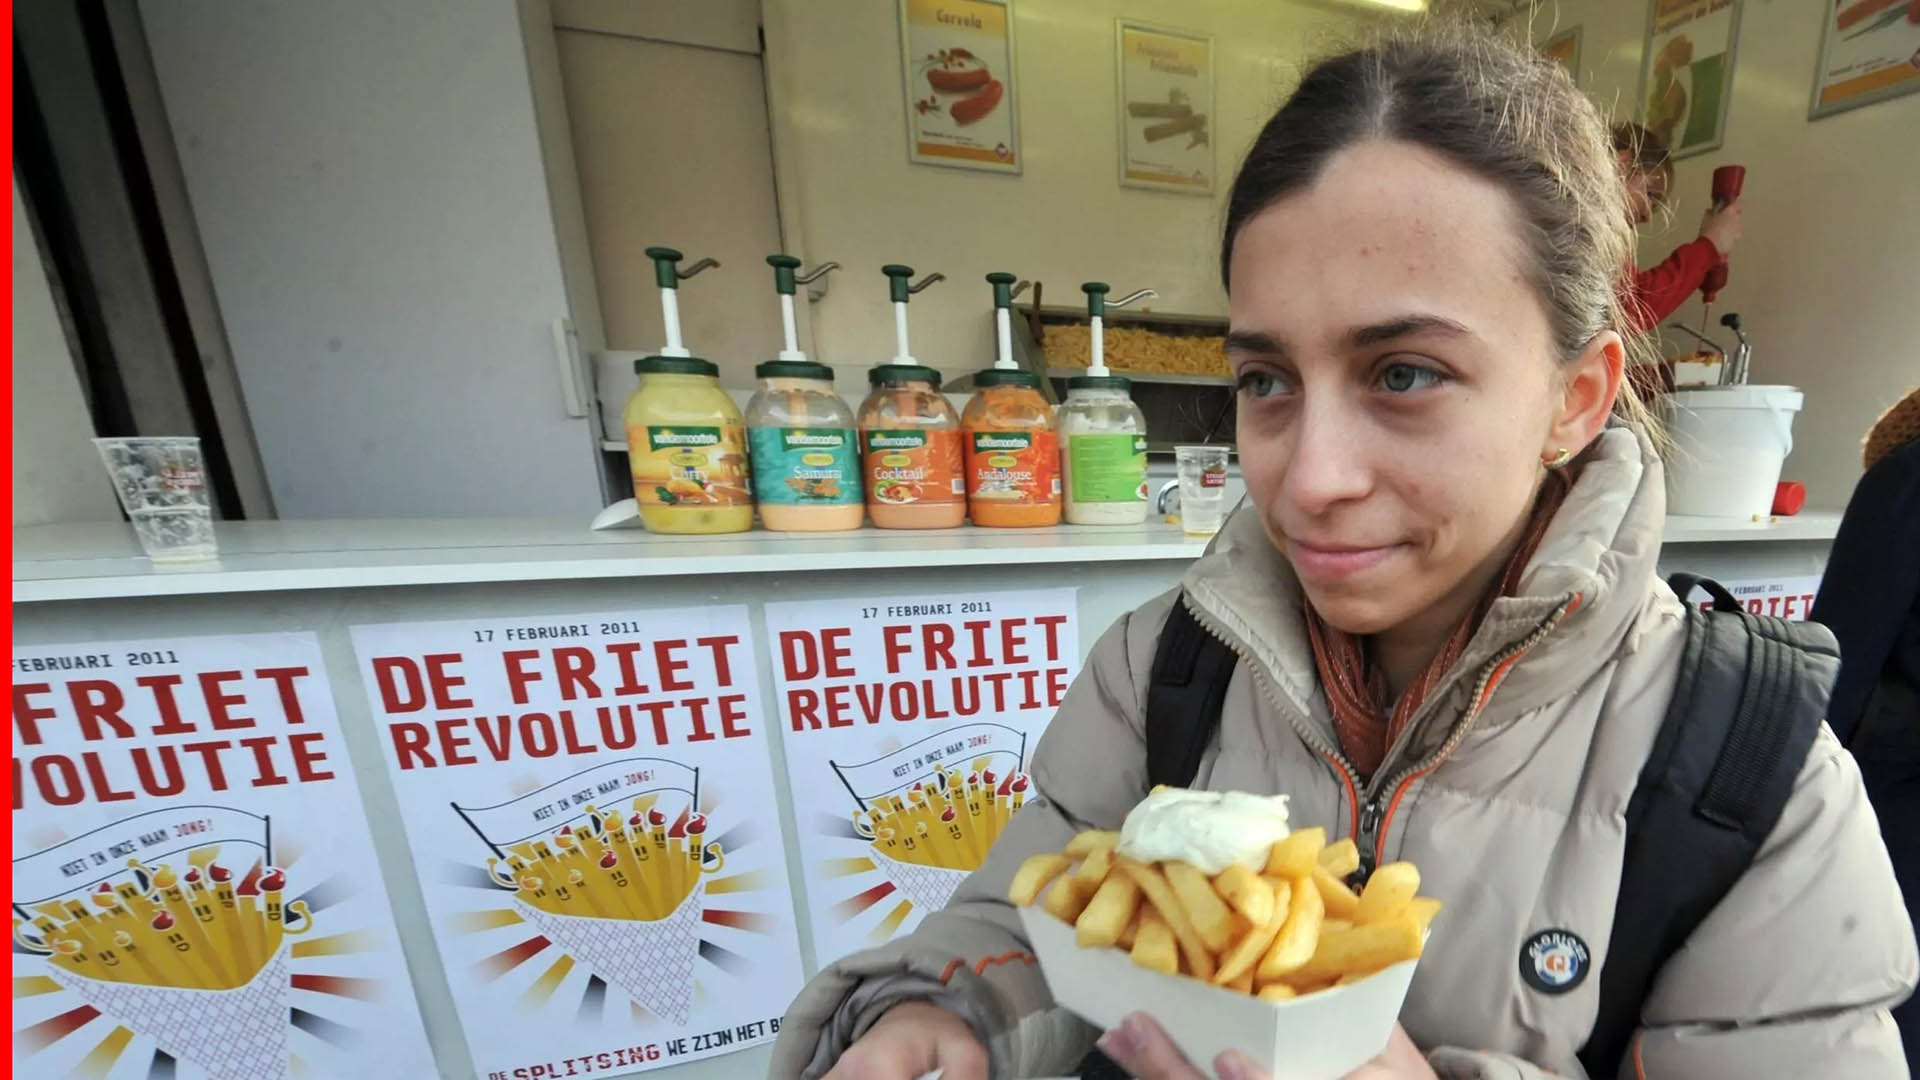 A woman eats french fries with mayonnaise on the day of the French potato revolution in Leuven, February 17, 2011 (AFP)